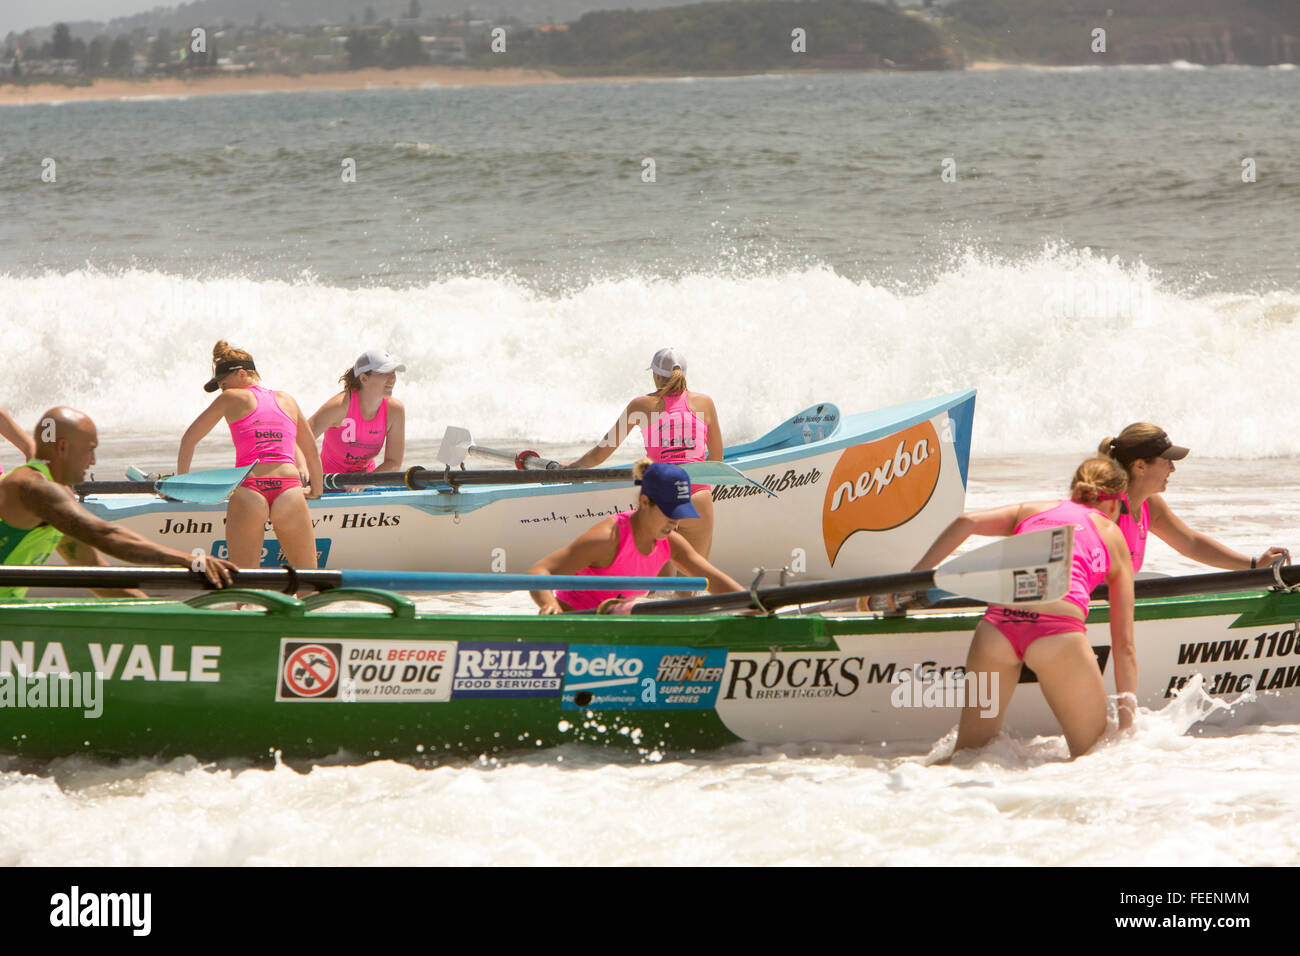 Sydney, Australia. 6th February, 2016. Ocean Thunder surfboat racing carnival a televised Professional Surf boat racing event held on Collaroy Beach,Sydney, featuring elite mens and womens surf boat series. Credit:  model10/Alamy Live News. Pictured womens crew team prepare to launch their surfboat Stock Photo